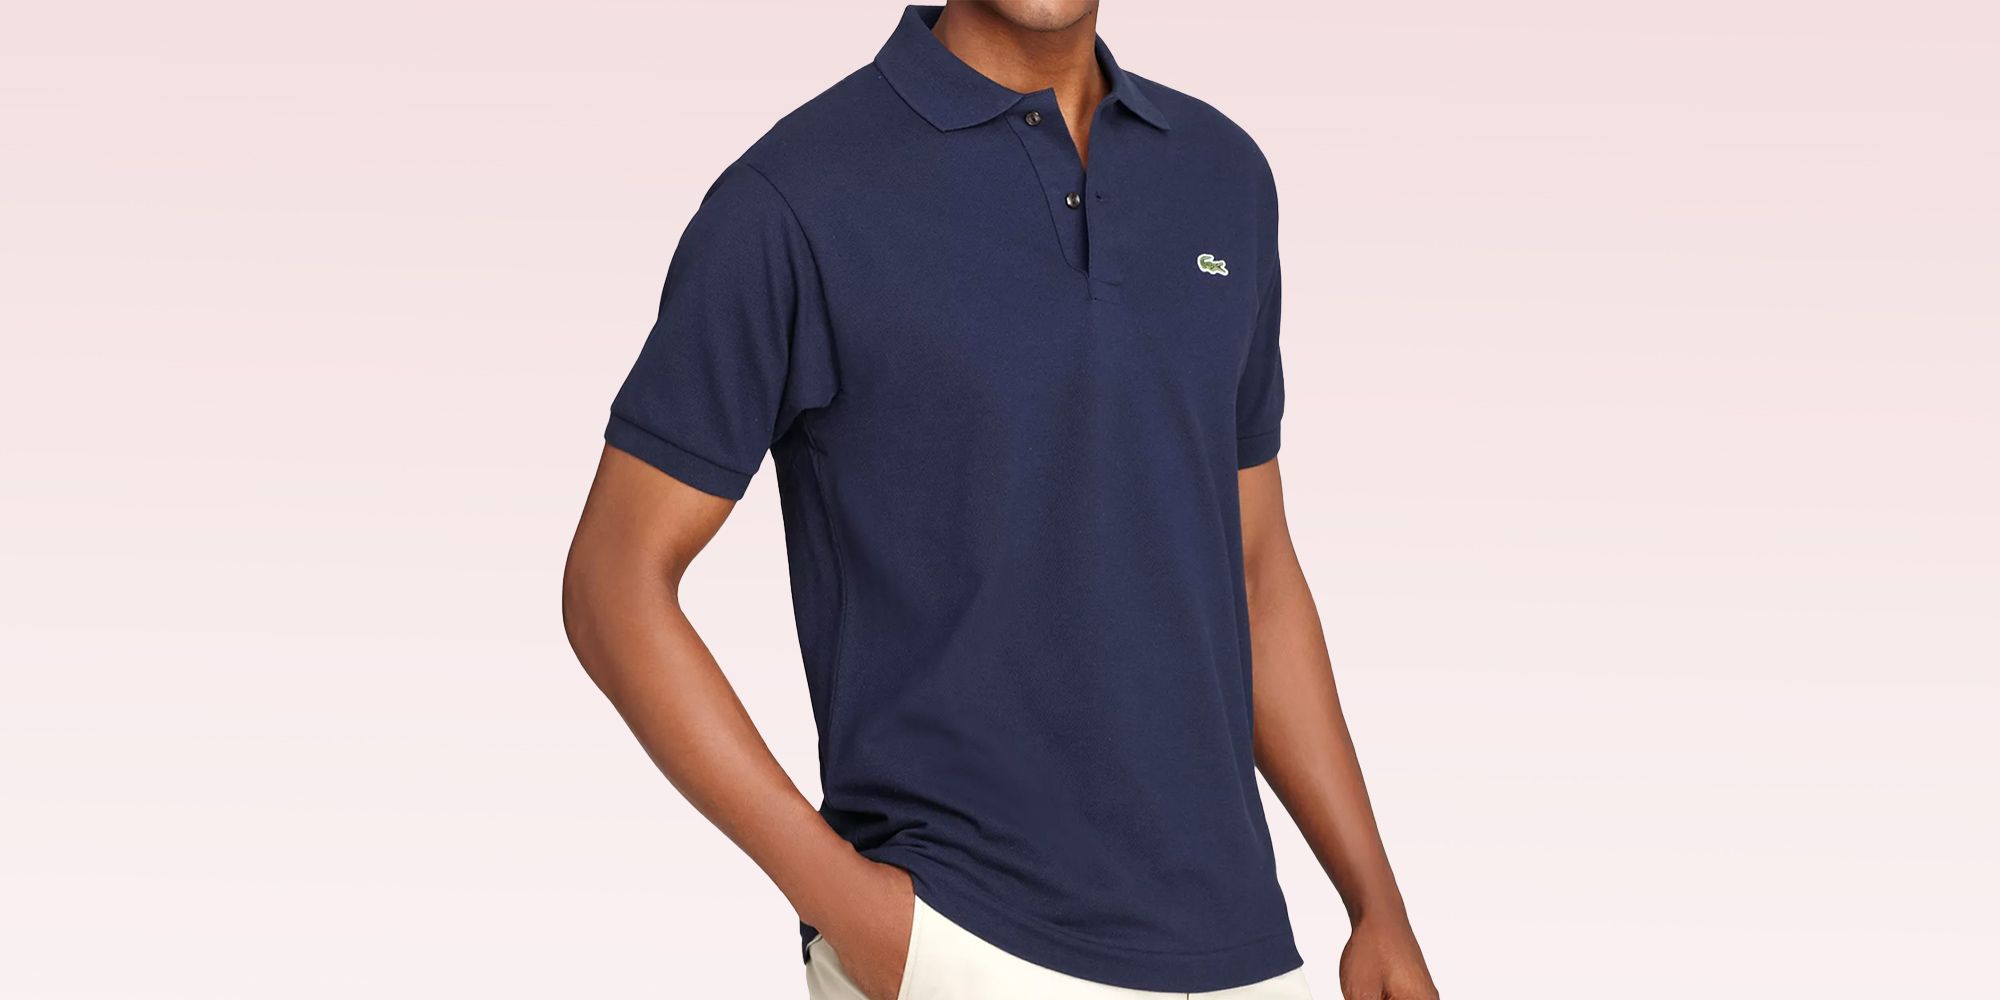 You Can Get of Discount Signature Prime Right a Now, Lacoste\'s Deep Day Courtesy at Polo